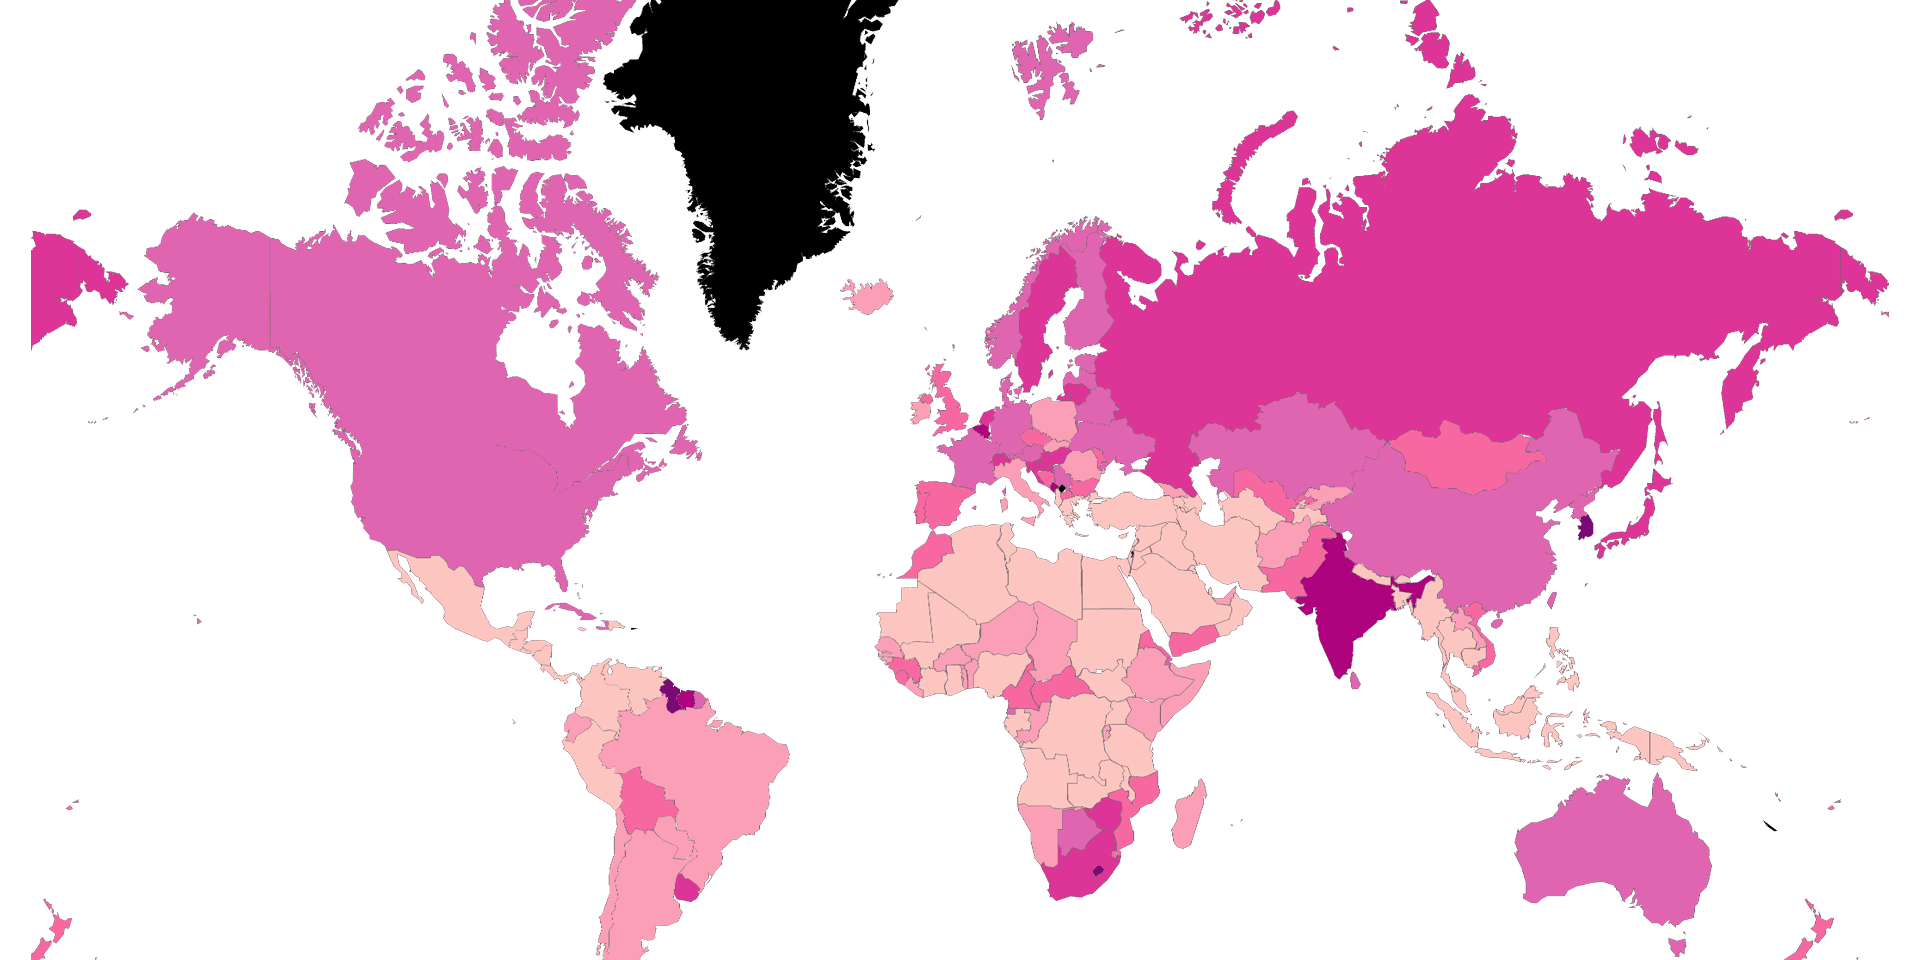 Suicide Mortality Rate Female Per 100,000 Female Population by Country Map